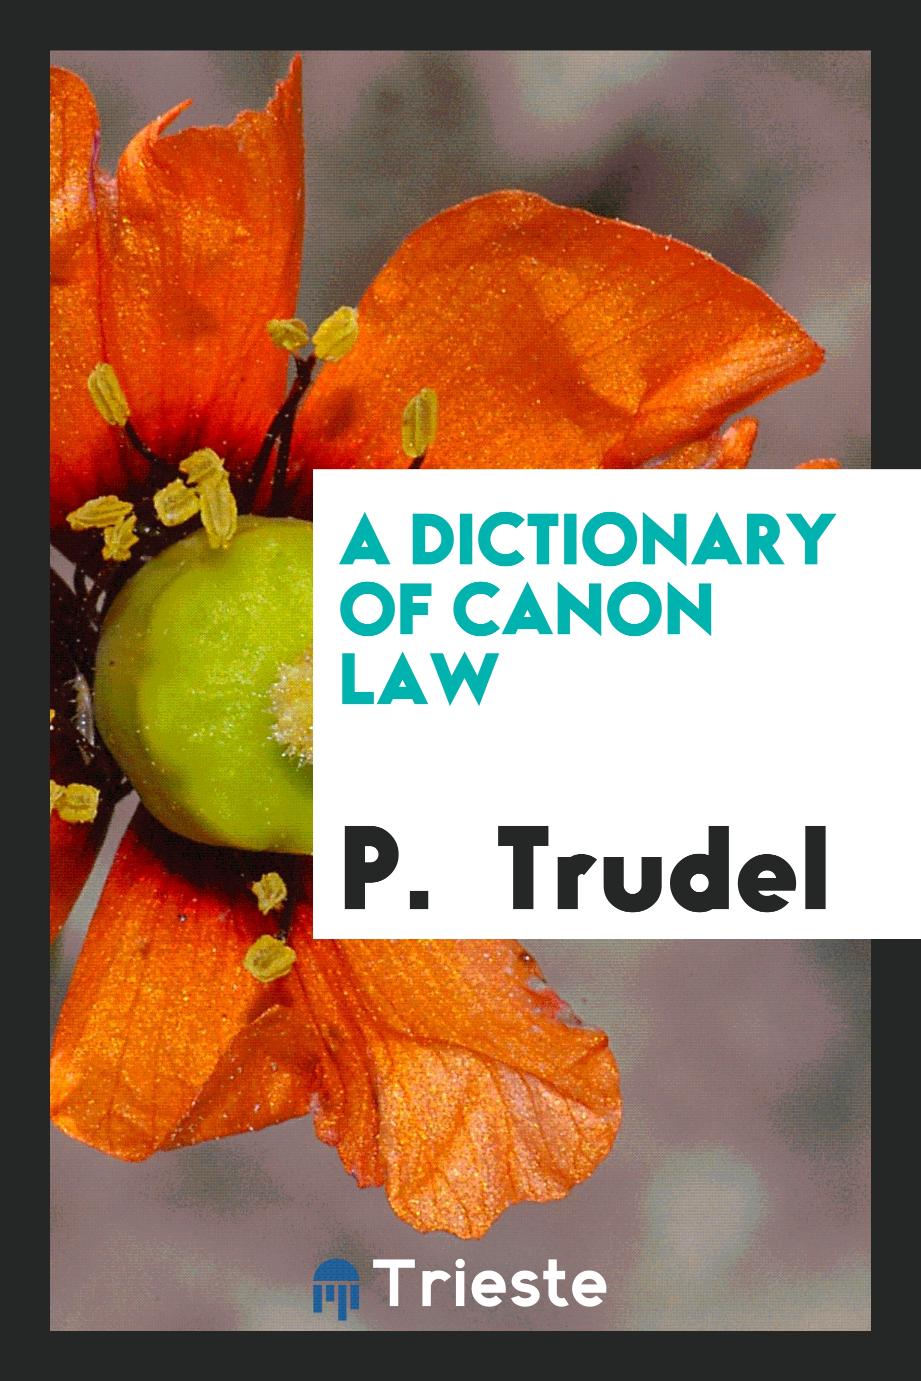 A Dictionary of Canon Law